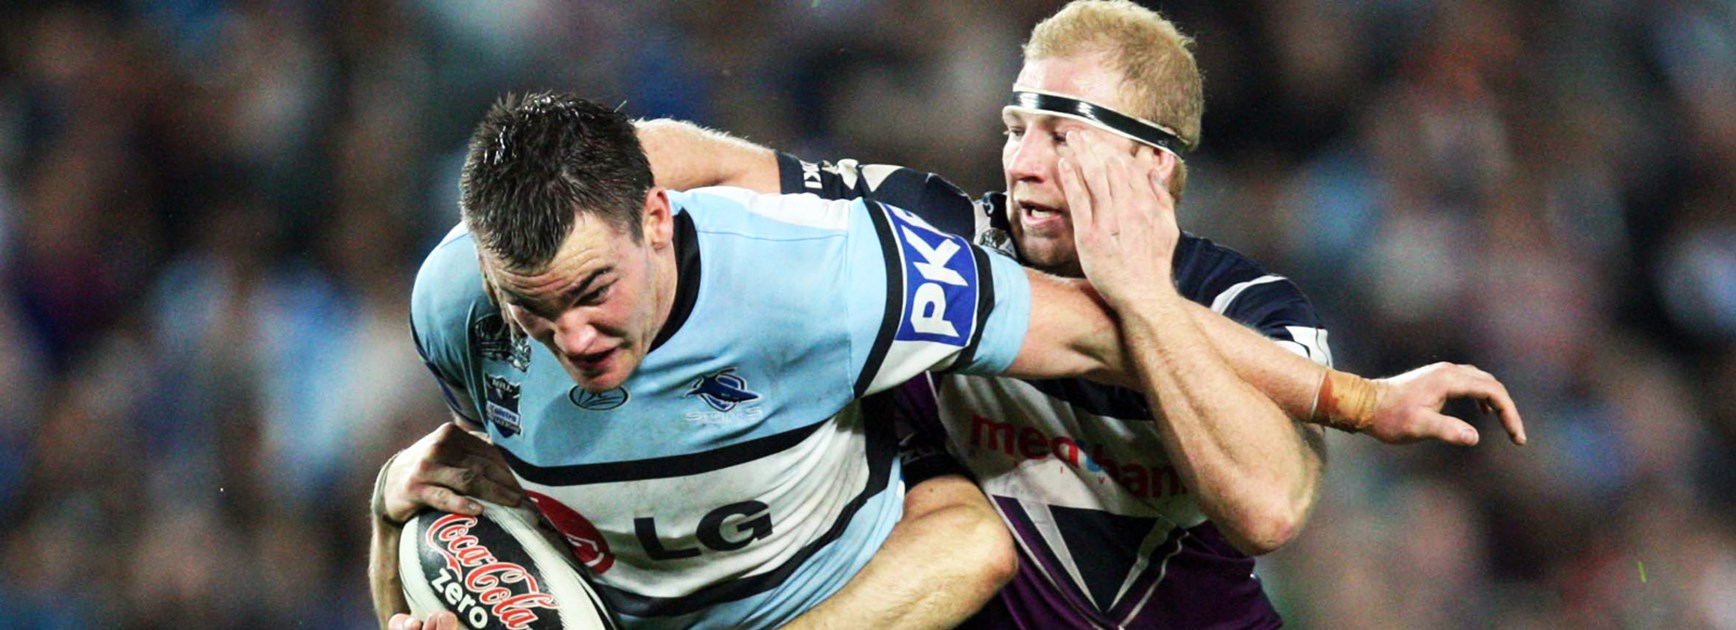 Luke Douglas in action for Cronulla in the game that still haunts him.